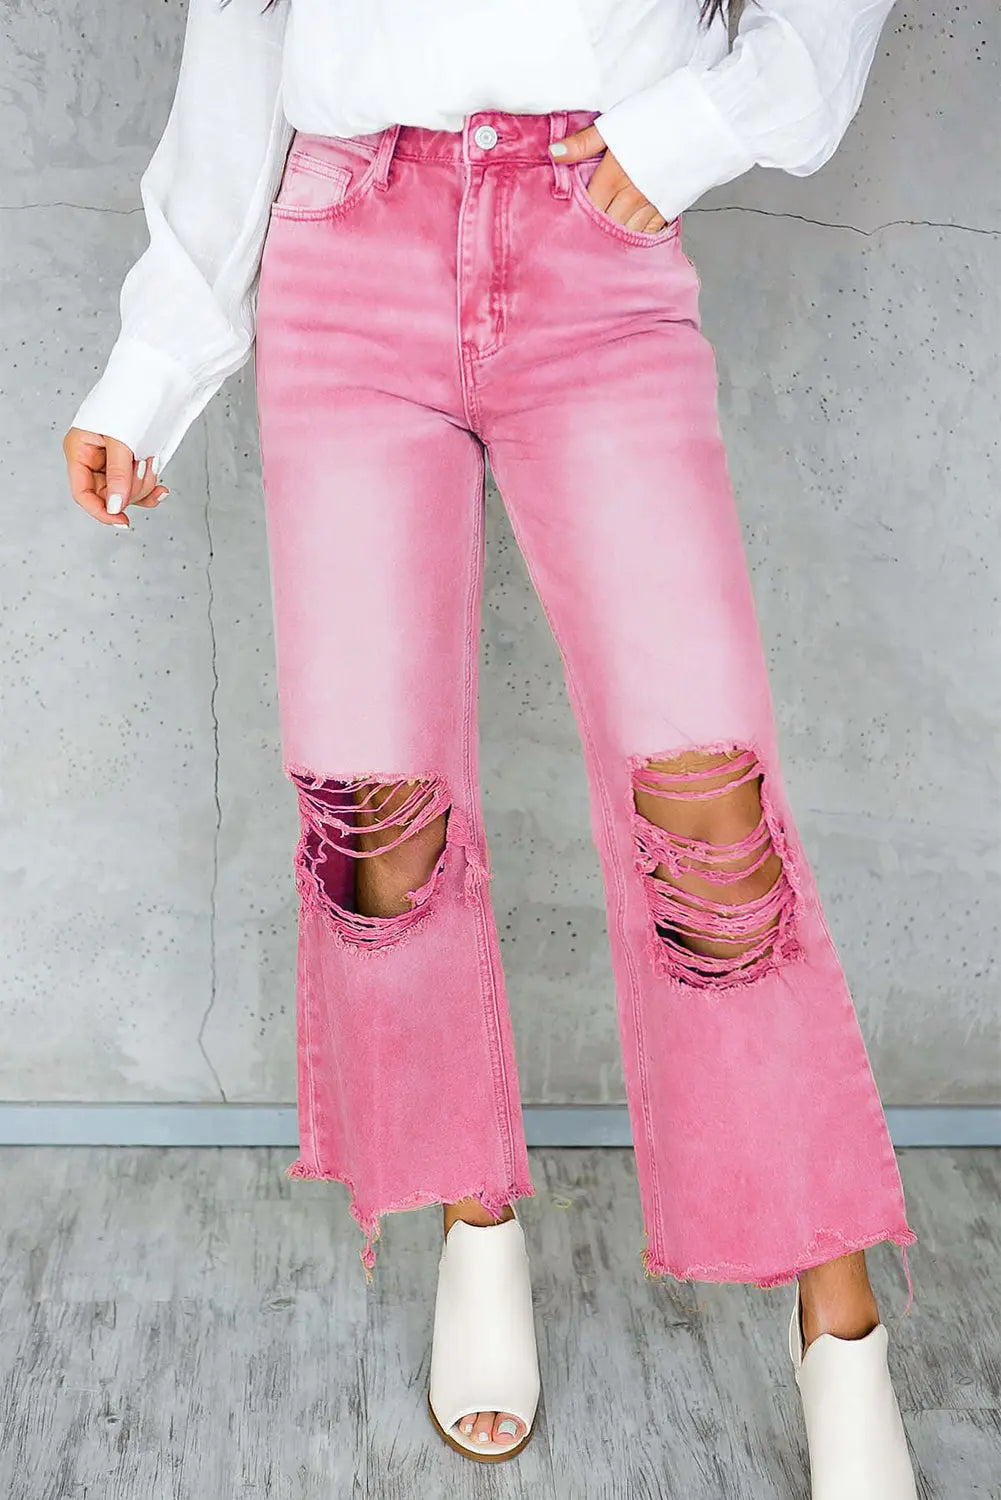 Peach Blossom - Distressed Hollow Out High Waist Flare Jeans - 3 colors - womens jeans at TFC&H Co.